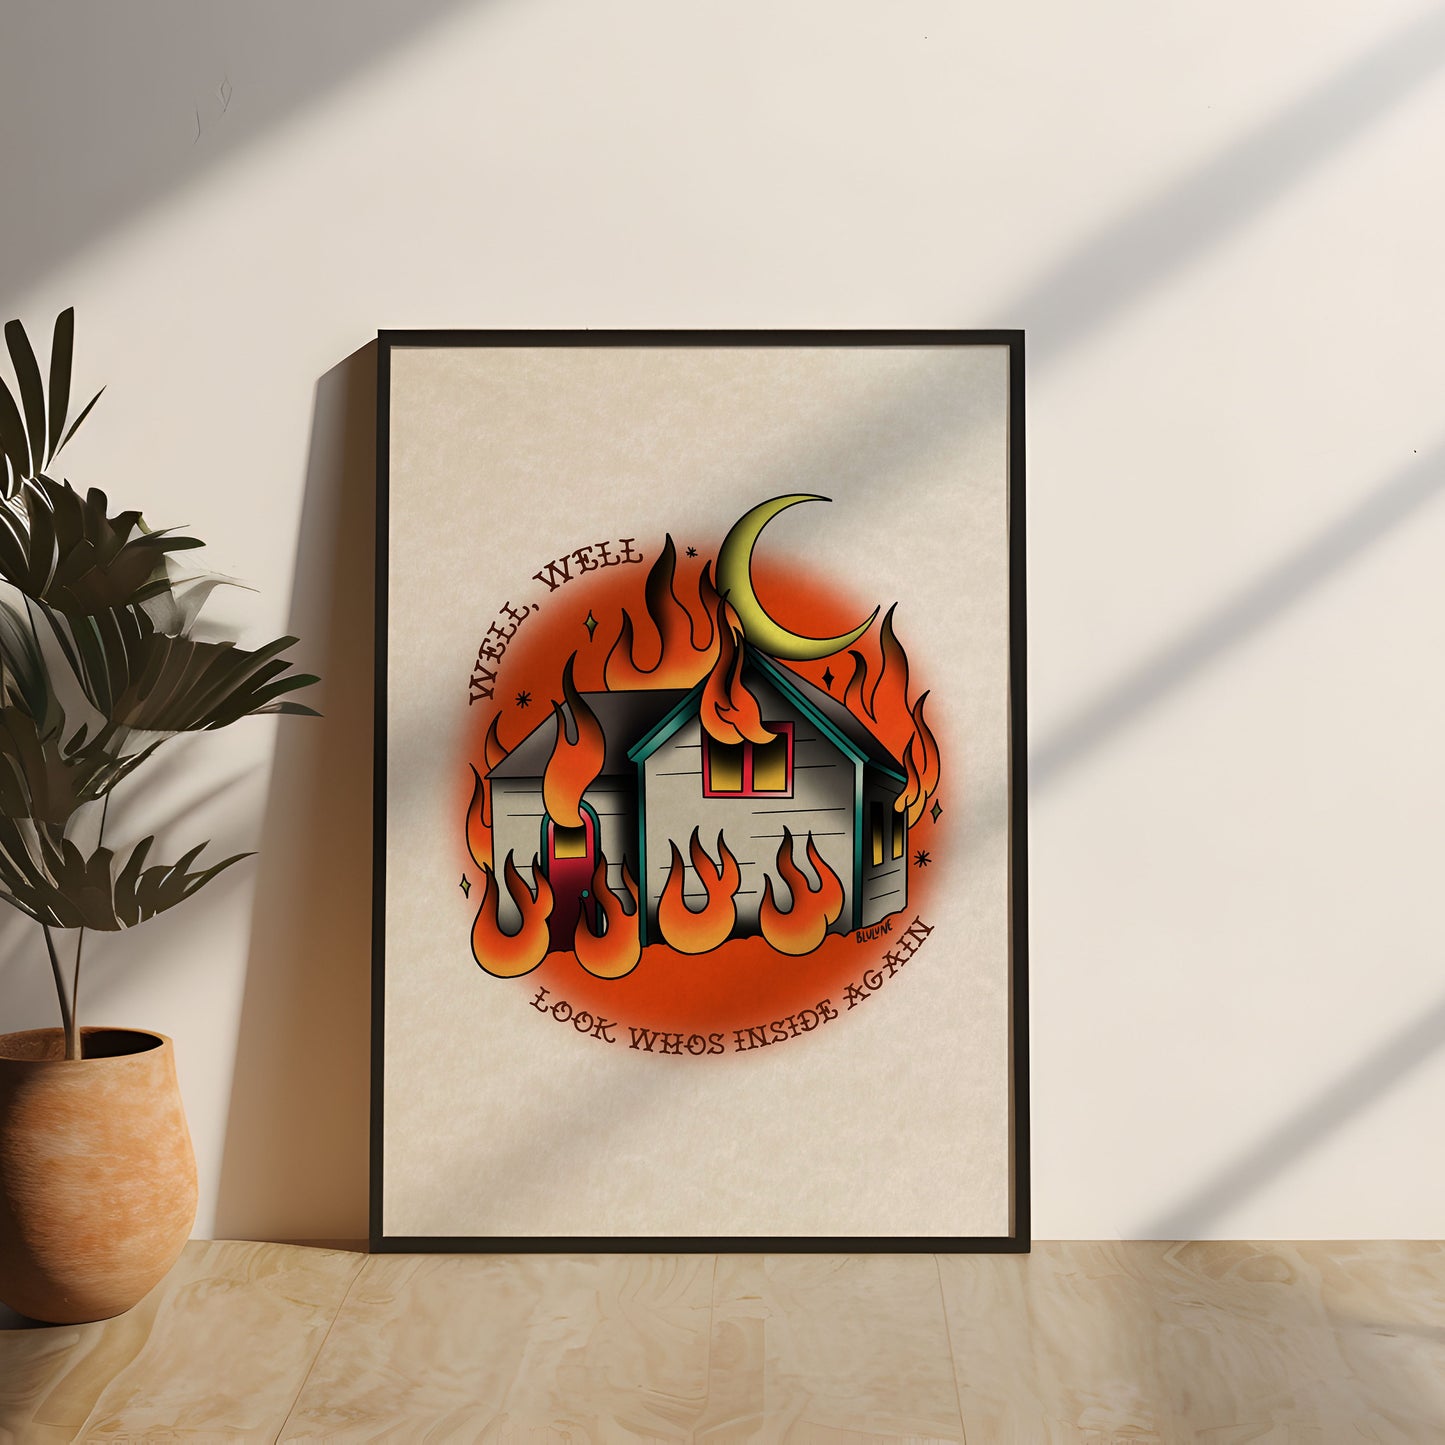 Tattoo Style Poster - Look Who's Inside Again - Art Print Wall Art - Instant Download - Printable Art